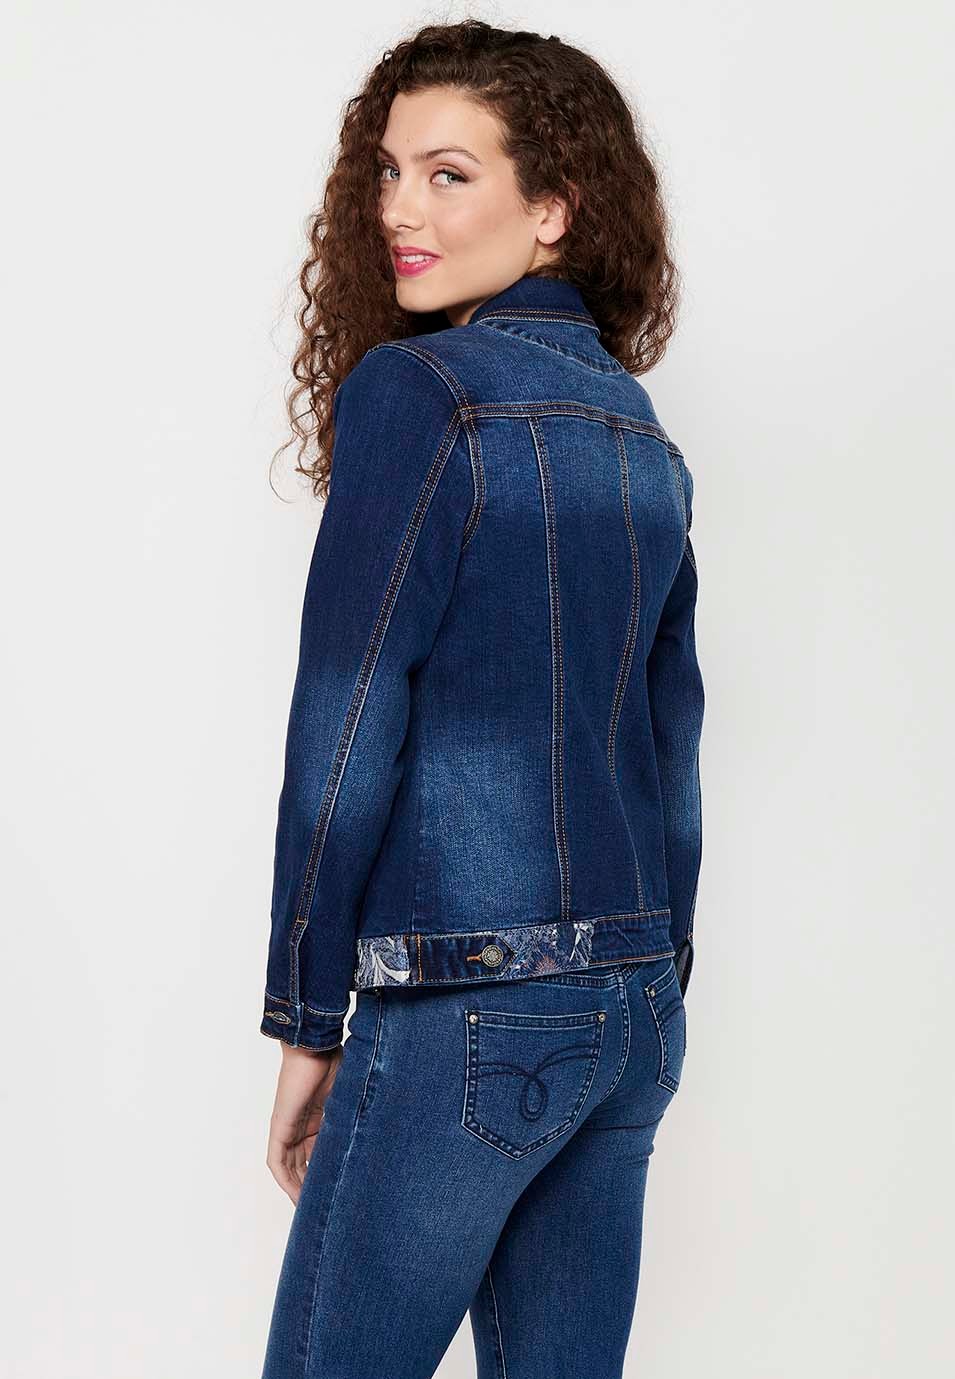 Dark Blue Long Sleeve Denim Jacket with Button Front Closure and Pockets with Embroidery on the Shoulders for Women 9